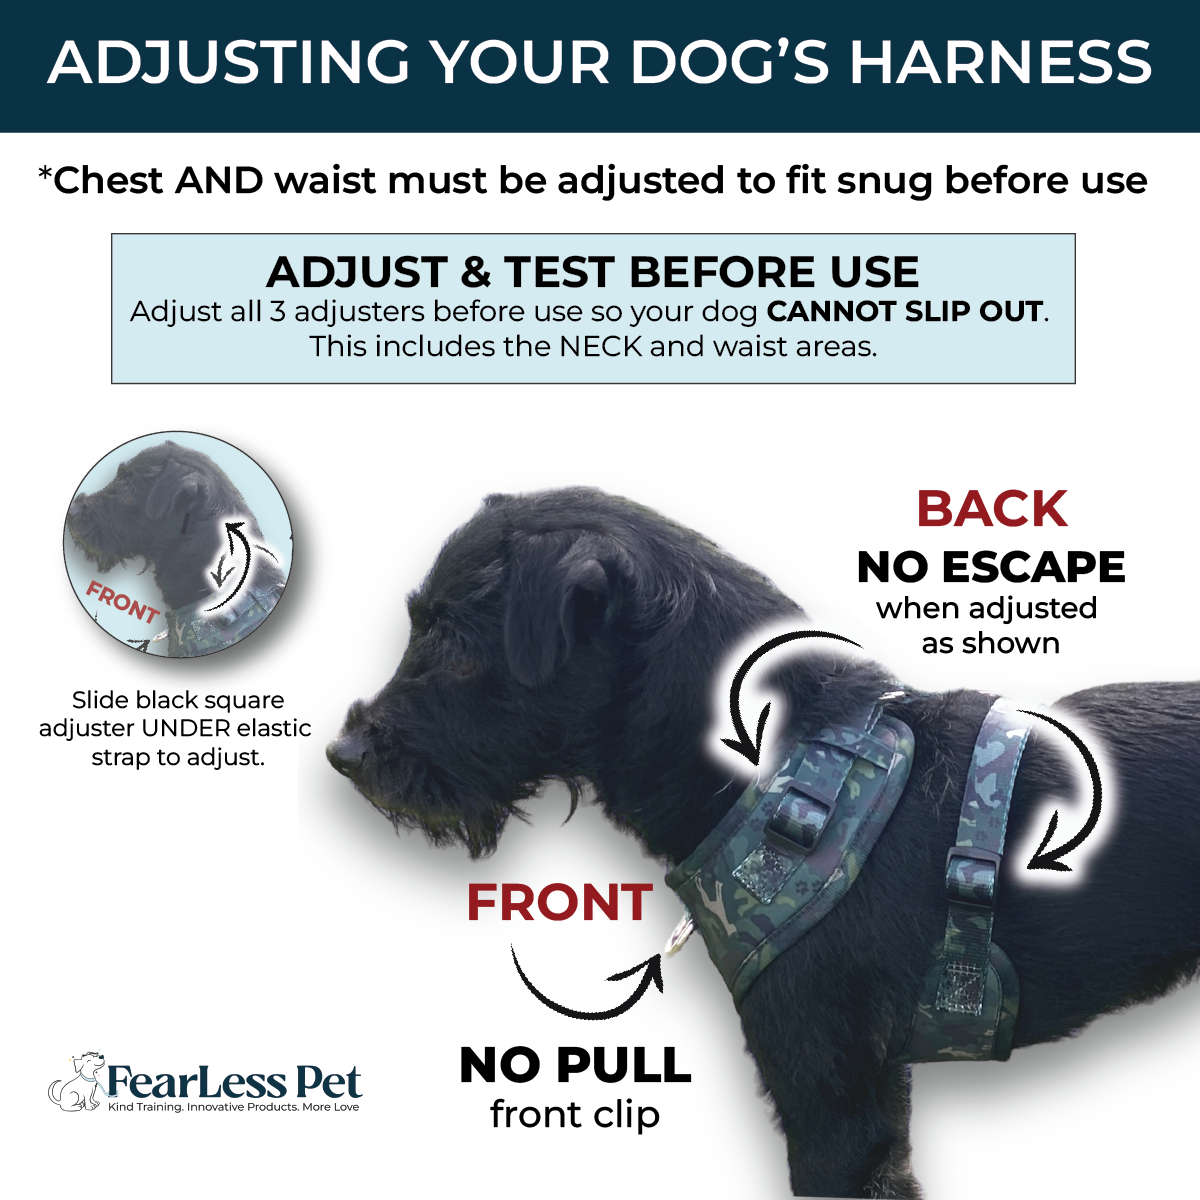 an infographic showing how to adjust a dog harness from fearless pet with neck adjusters and a no pull front clip harness